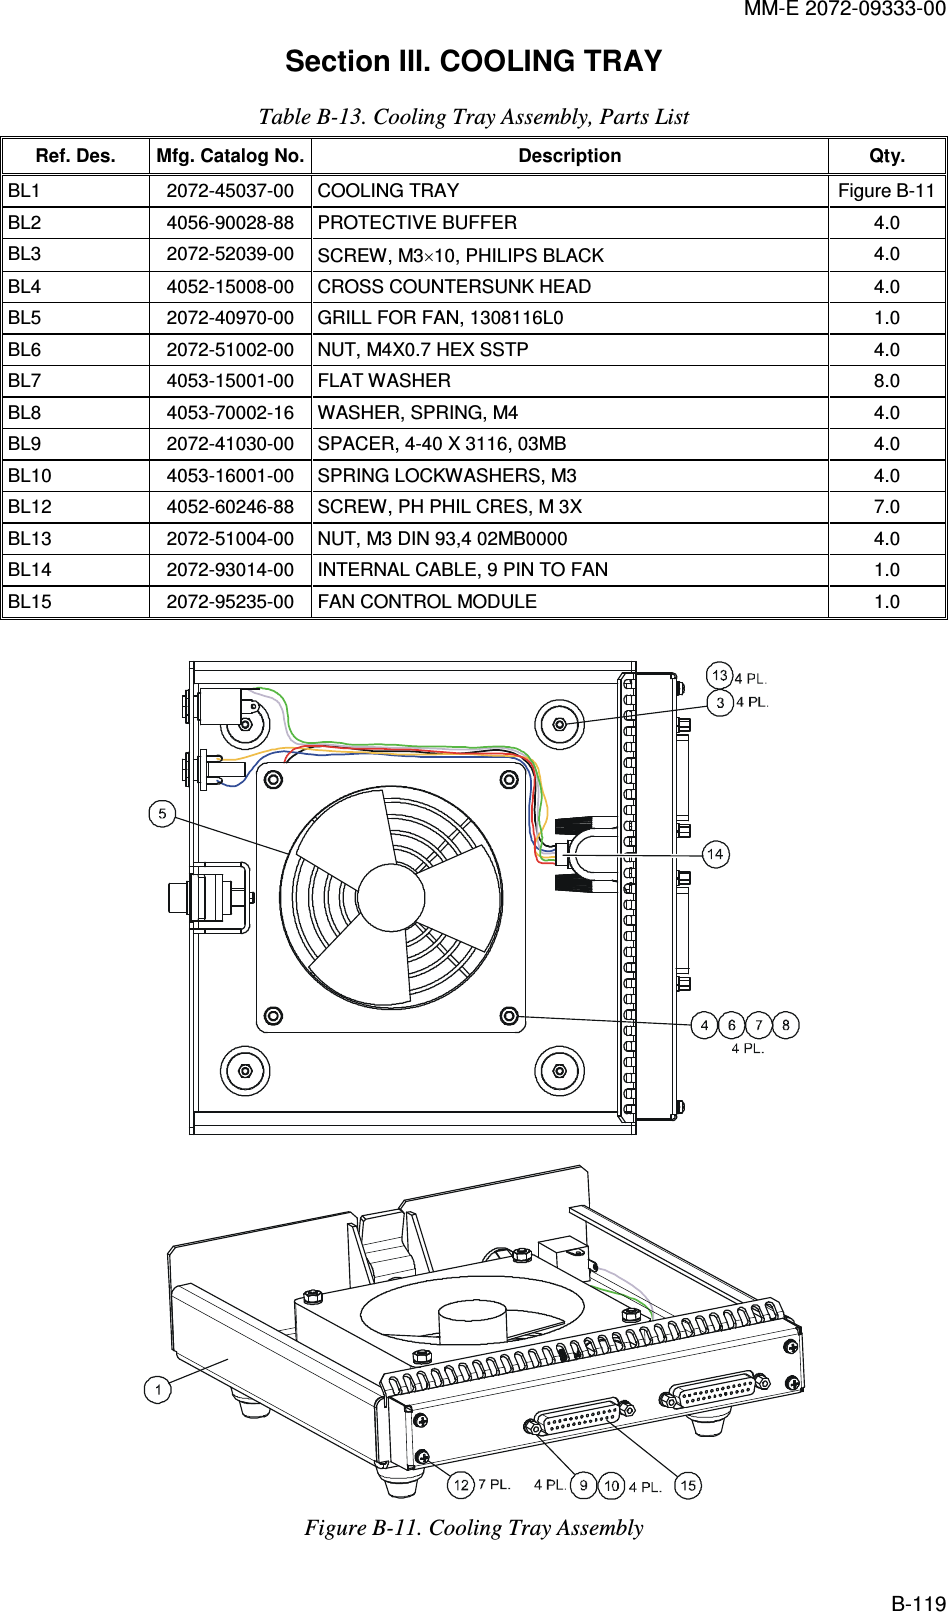 MM-E 2072-09333-00 B-119 Section III. COOLING TRAY  Table  B-13. Cooling Tray Assembly, Parts List Ref. Des.  Mfg. Catalog No. Description  Qty. BL1  2072-45037-00  COOLING TRAY  Figure  B-11 BL2  4056-90028-88   PROTECTIVE BUFFER   4.0 BL3  2072-52039-00  SCREW, M3×10, PHILIPS BLACK  4.0 BL4  4052-15008-00  CROSS COUNTERSUNK HEAD  4.0 BL5  2072-40970-00  GRILL FOR FAN, 1308116L0  1.0 BL6  2072-51002-00  NUT, M4X0.7 HEX SSTP  4.0 BL7  4053-15001-00  FLAT WASHER  8.0 BL8  4053-70002-16   WASHER, SPRING, M4  4.0 BL9  2072-41030-00  SPACER, 4-40 X 3116, 03MB  4.0 BL10  4053-16001-00  SPRING LOCKWASHERS, M3  4.0 BL12  4052-60246-88  SCREW, PH PHIL CRES, M 3X  7.0 BL13  2072-51004-00  NUT, M3 DIN 93,4 02MB0000  4.0 BL14  2072-93014-00  INTERNAL CABLE, 9 PIN TO FAN  1.0 BL15  2072-95235-00  FAN CONTROL MODULE  1.0     Figure  B-11. Cooling Tray Assembly 